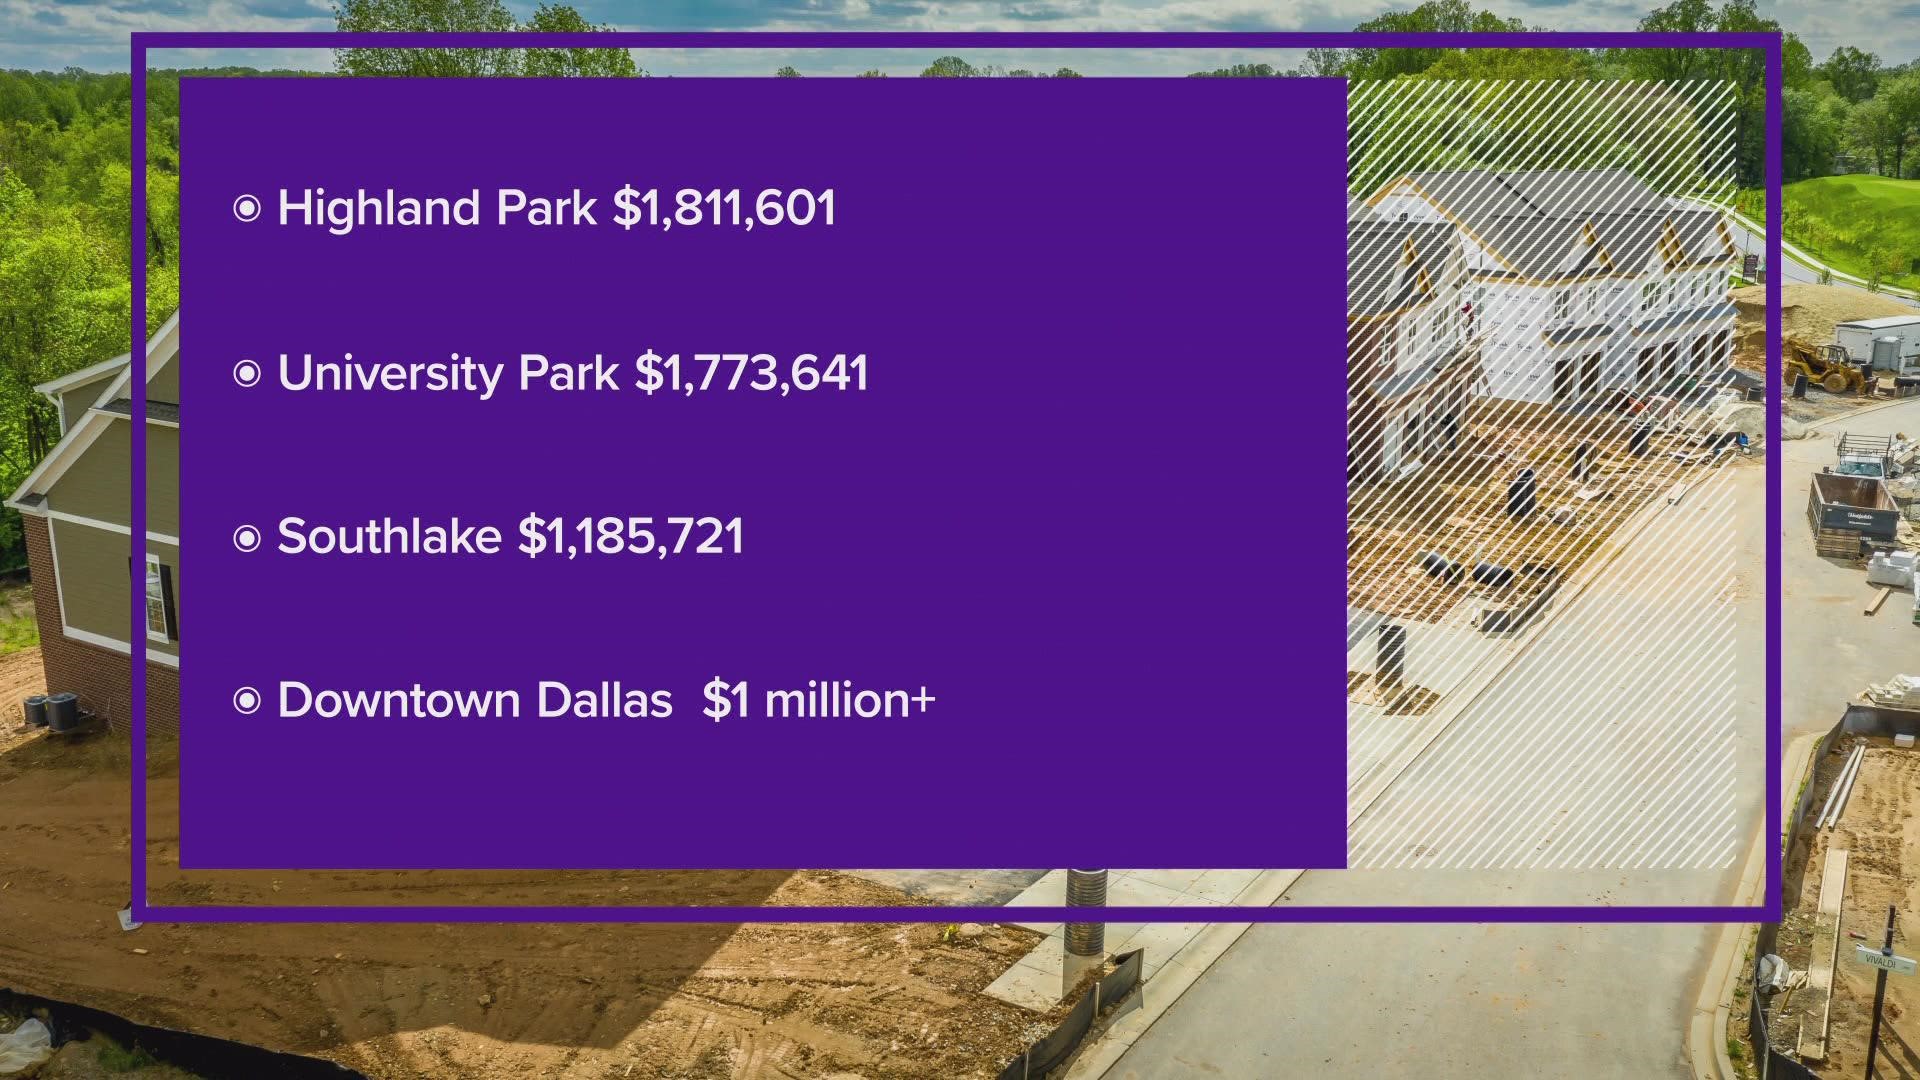 The king of the hill for home values in North Texas is Highland Park, with a median of $1,811,601 as of Aug. 31, according to a Zillow analysis.